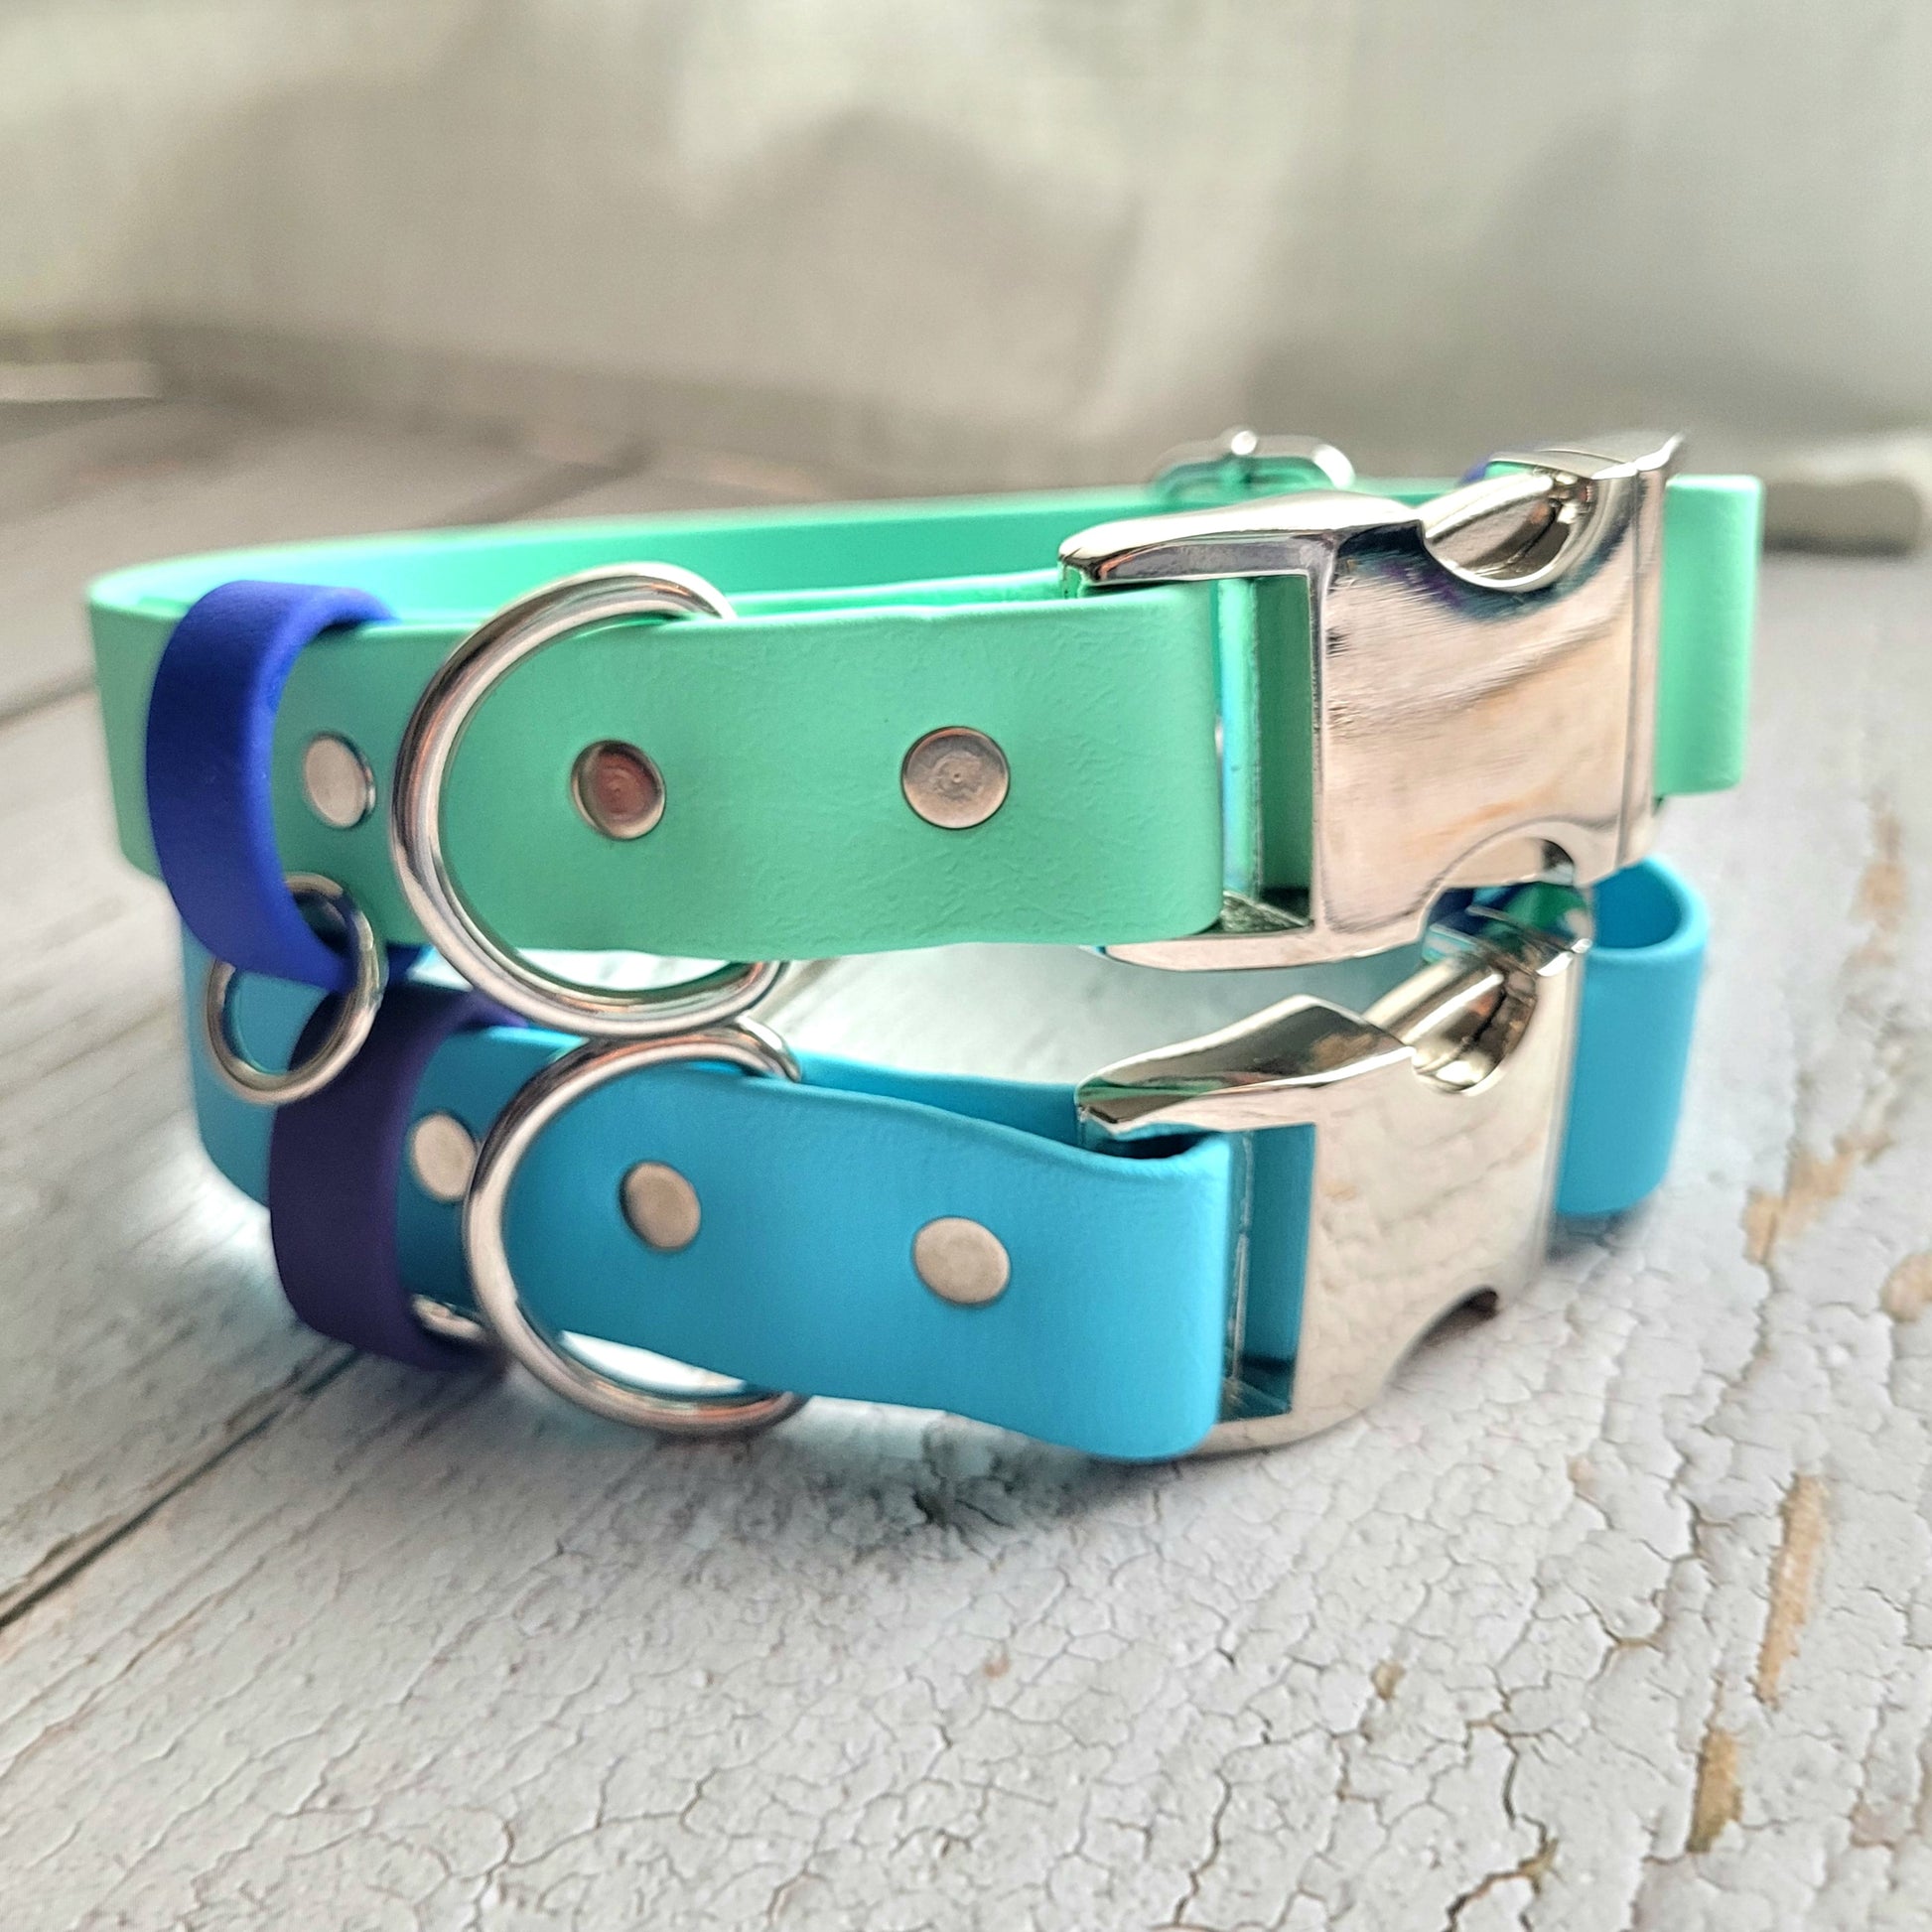 Sea foam green with royal blue strap keeper.  Sky blue with purple strap keeper